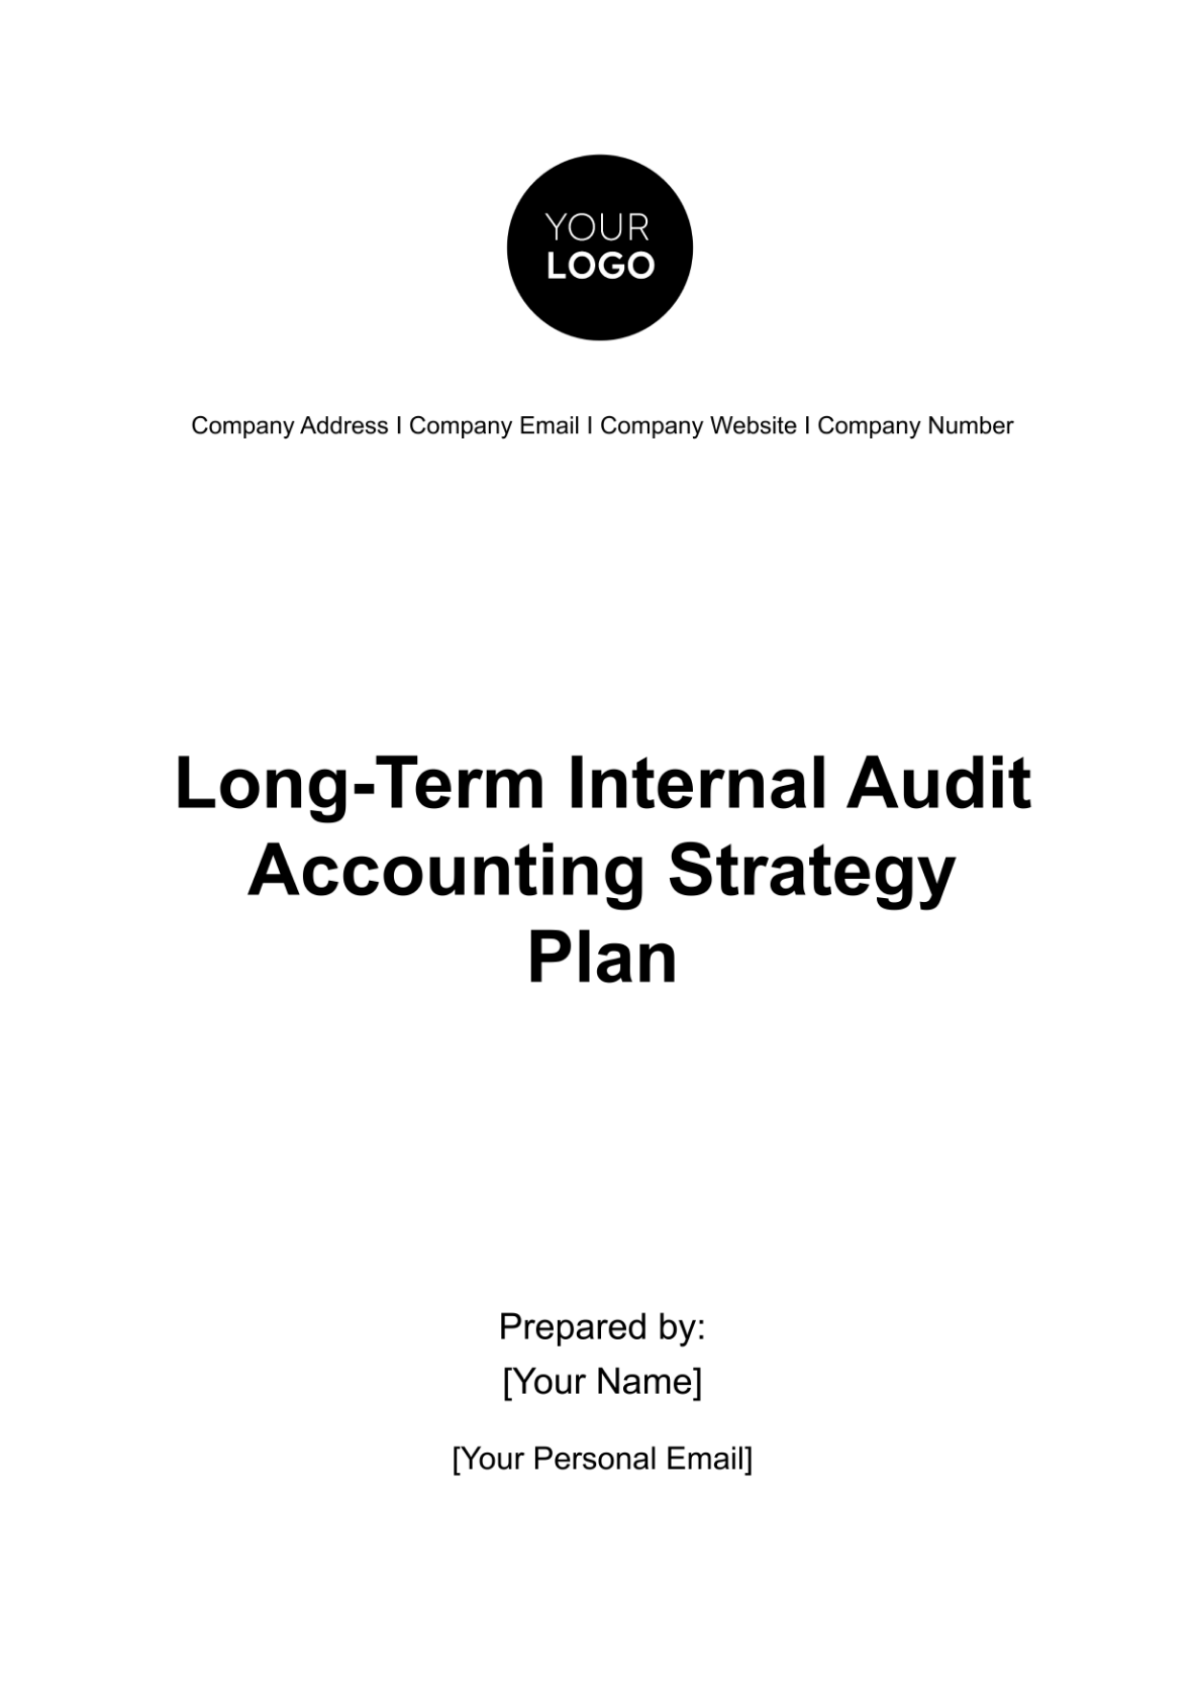 Long-Term Internal Audit Accounting Strategy Plan Template